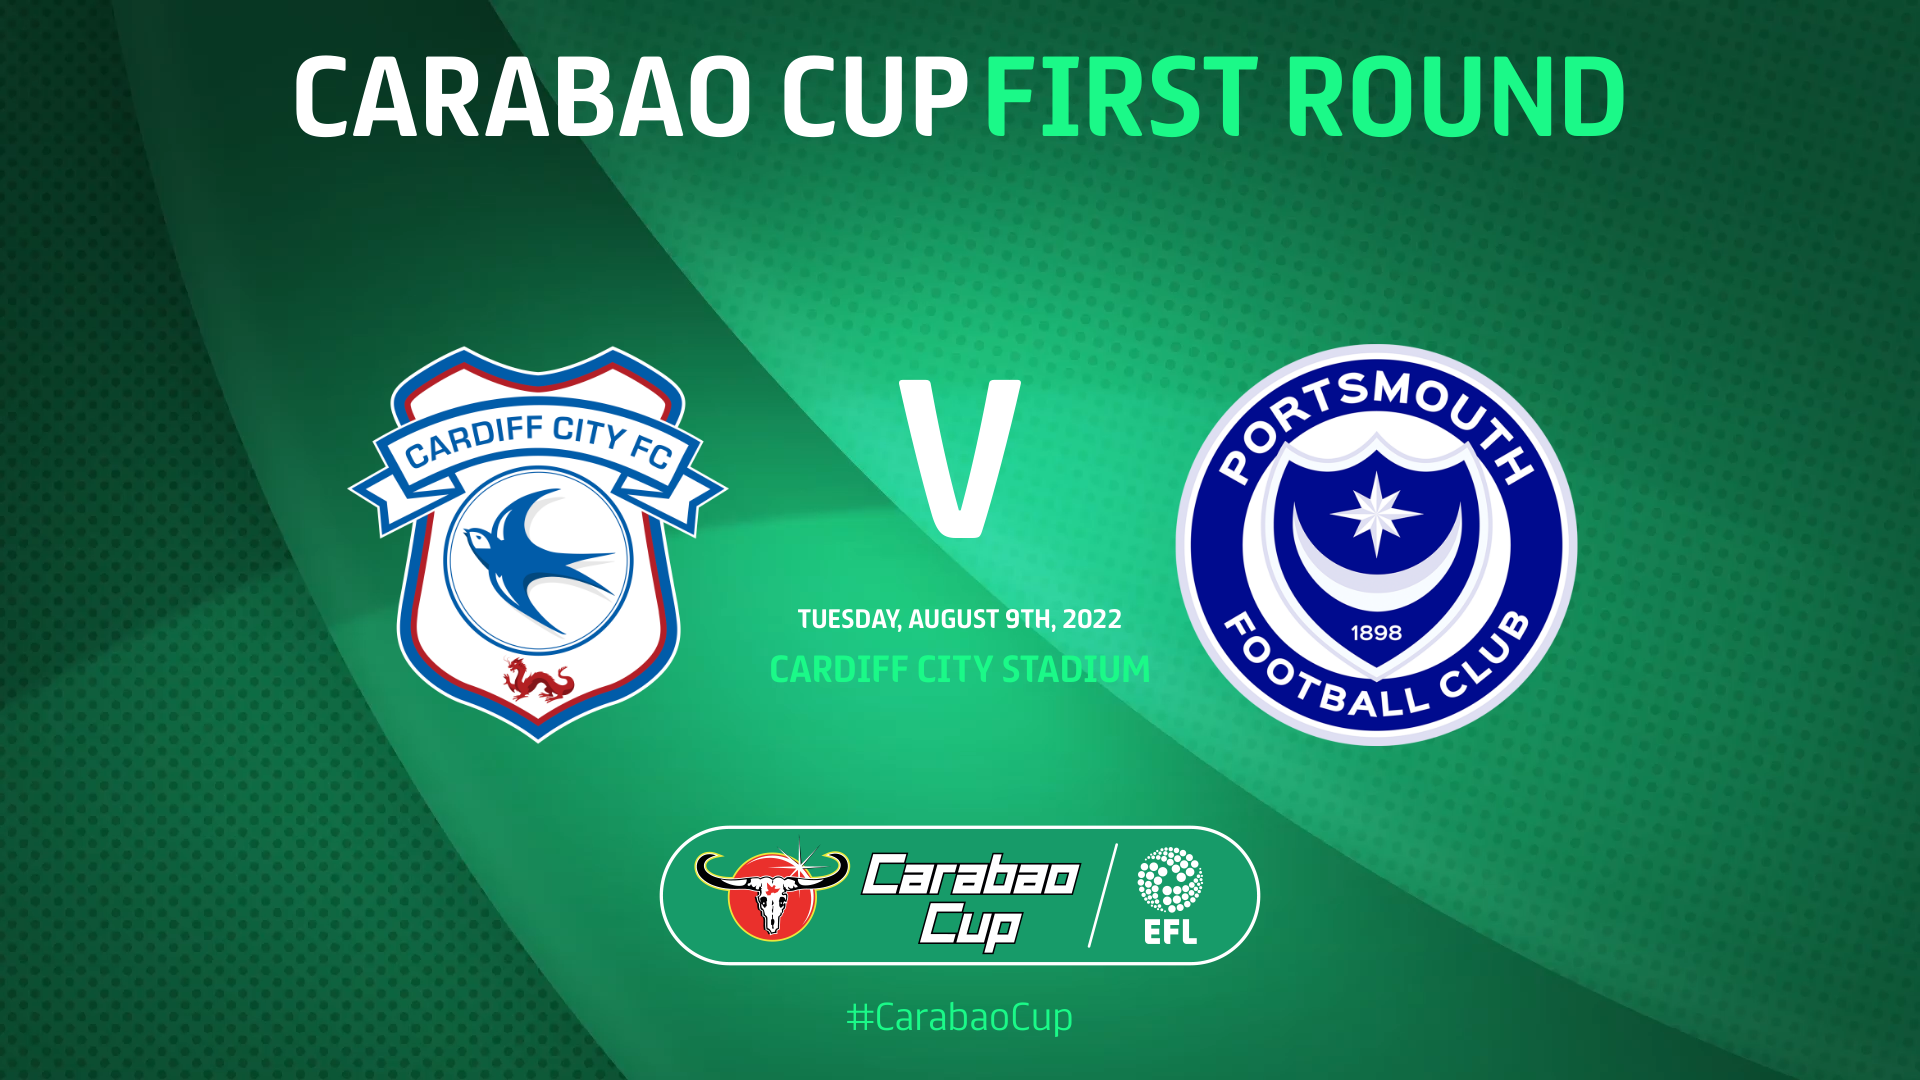 City host Portsmouth in the Carabao Cup First Round...